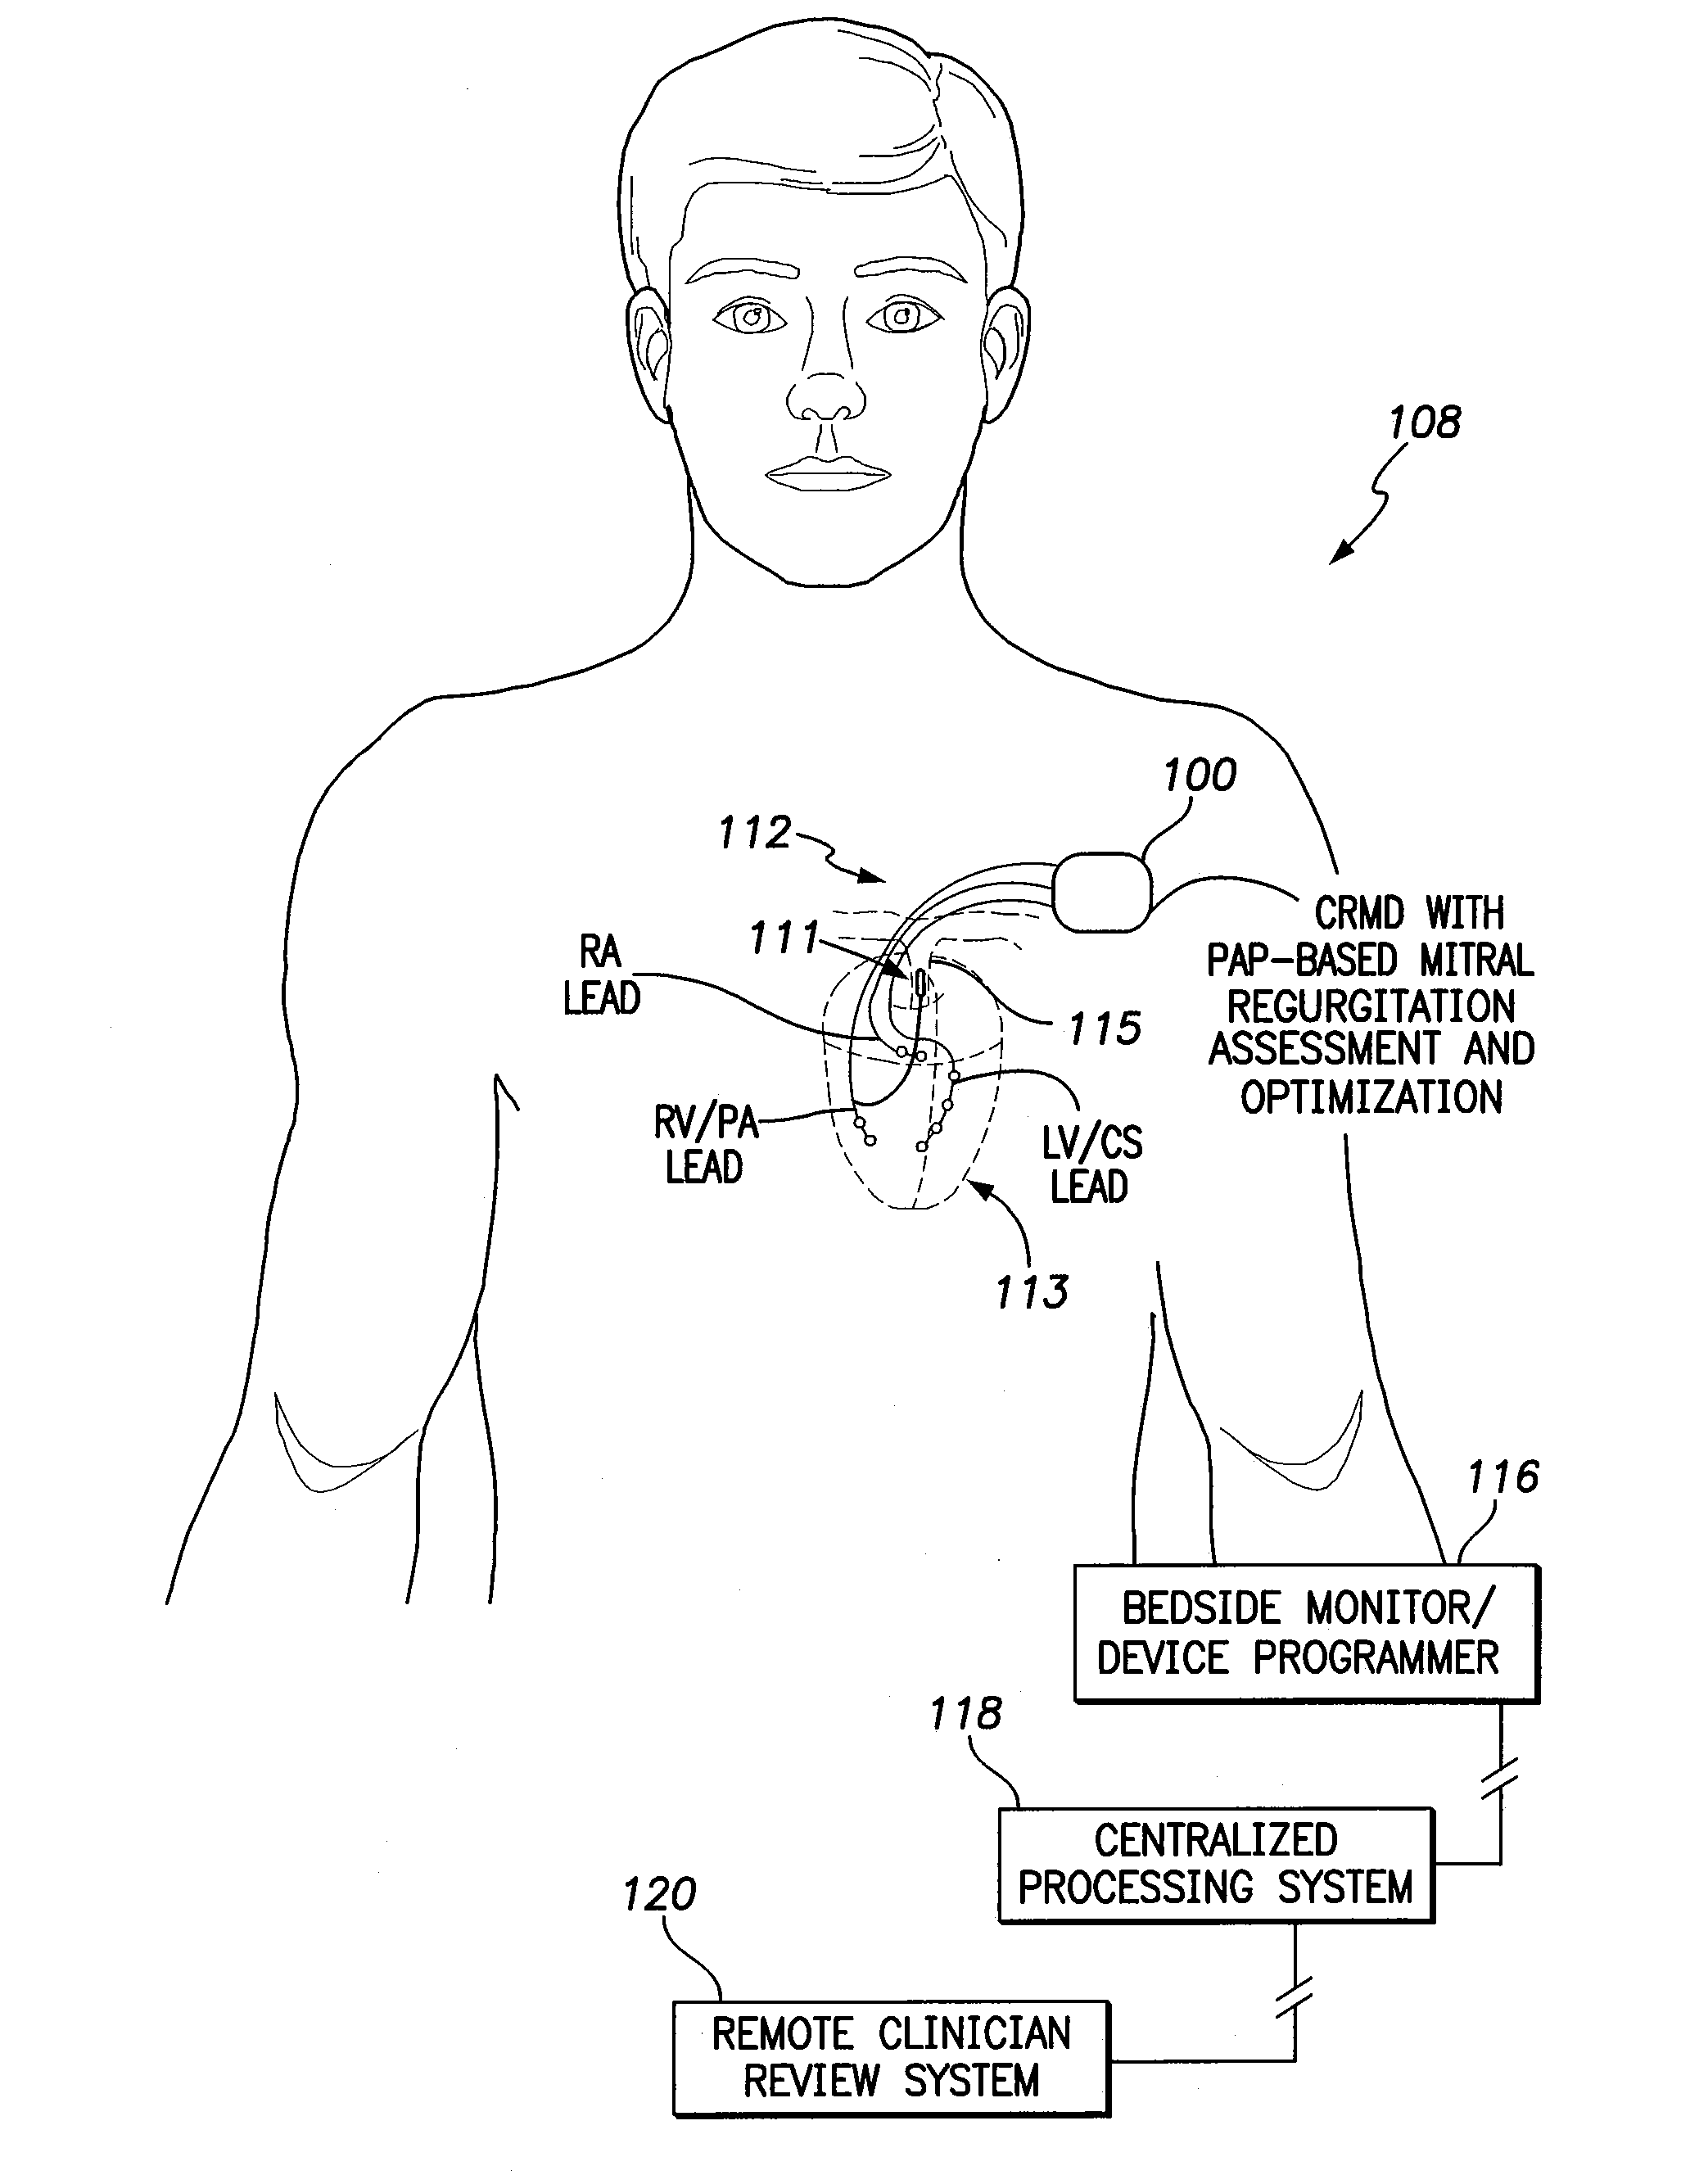 Systems and methods for using pulmonary artery pressure from an implantable sensor to detect mitral regurgitation and optimize pacing delays